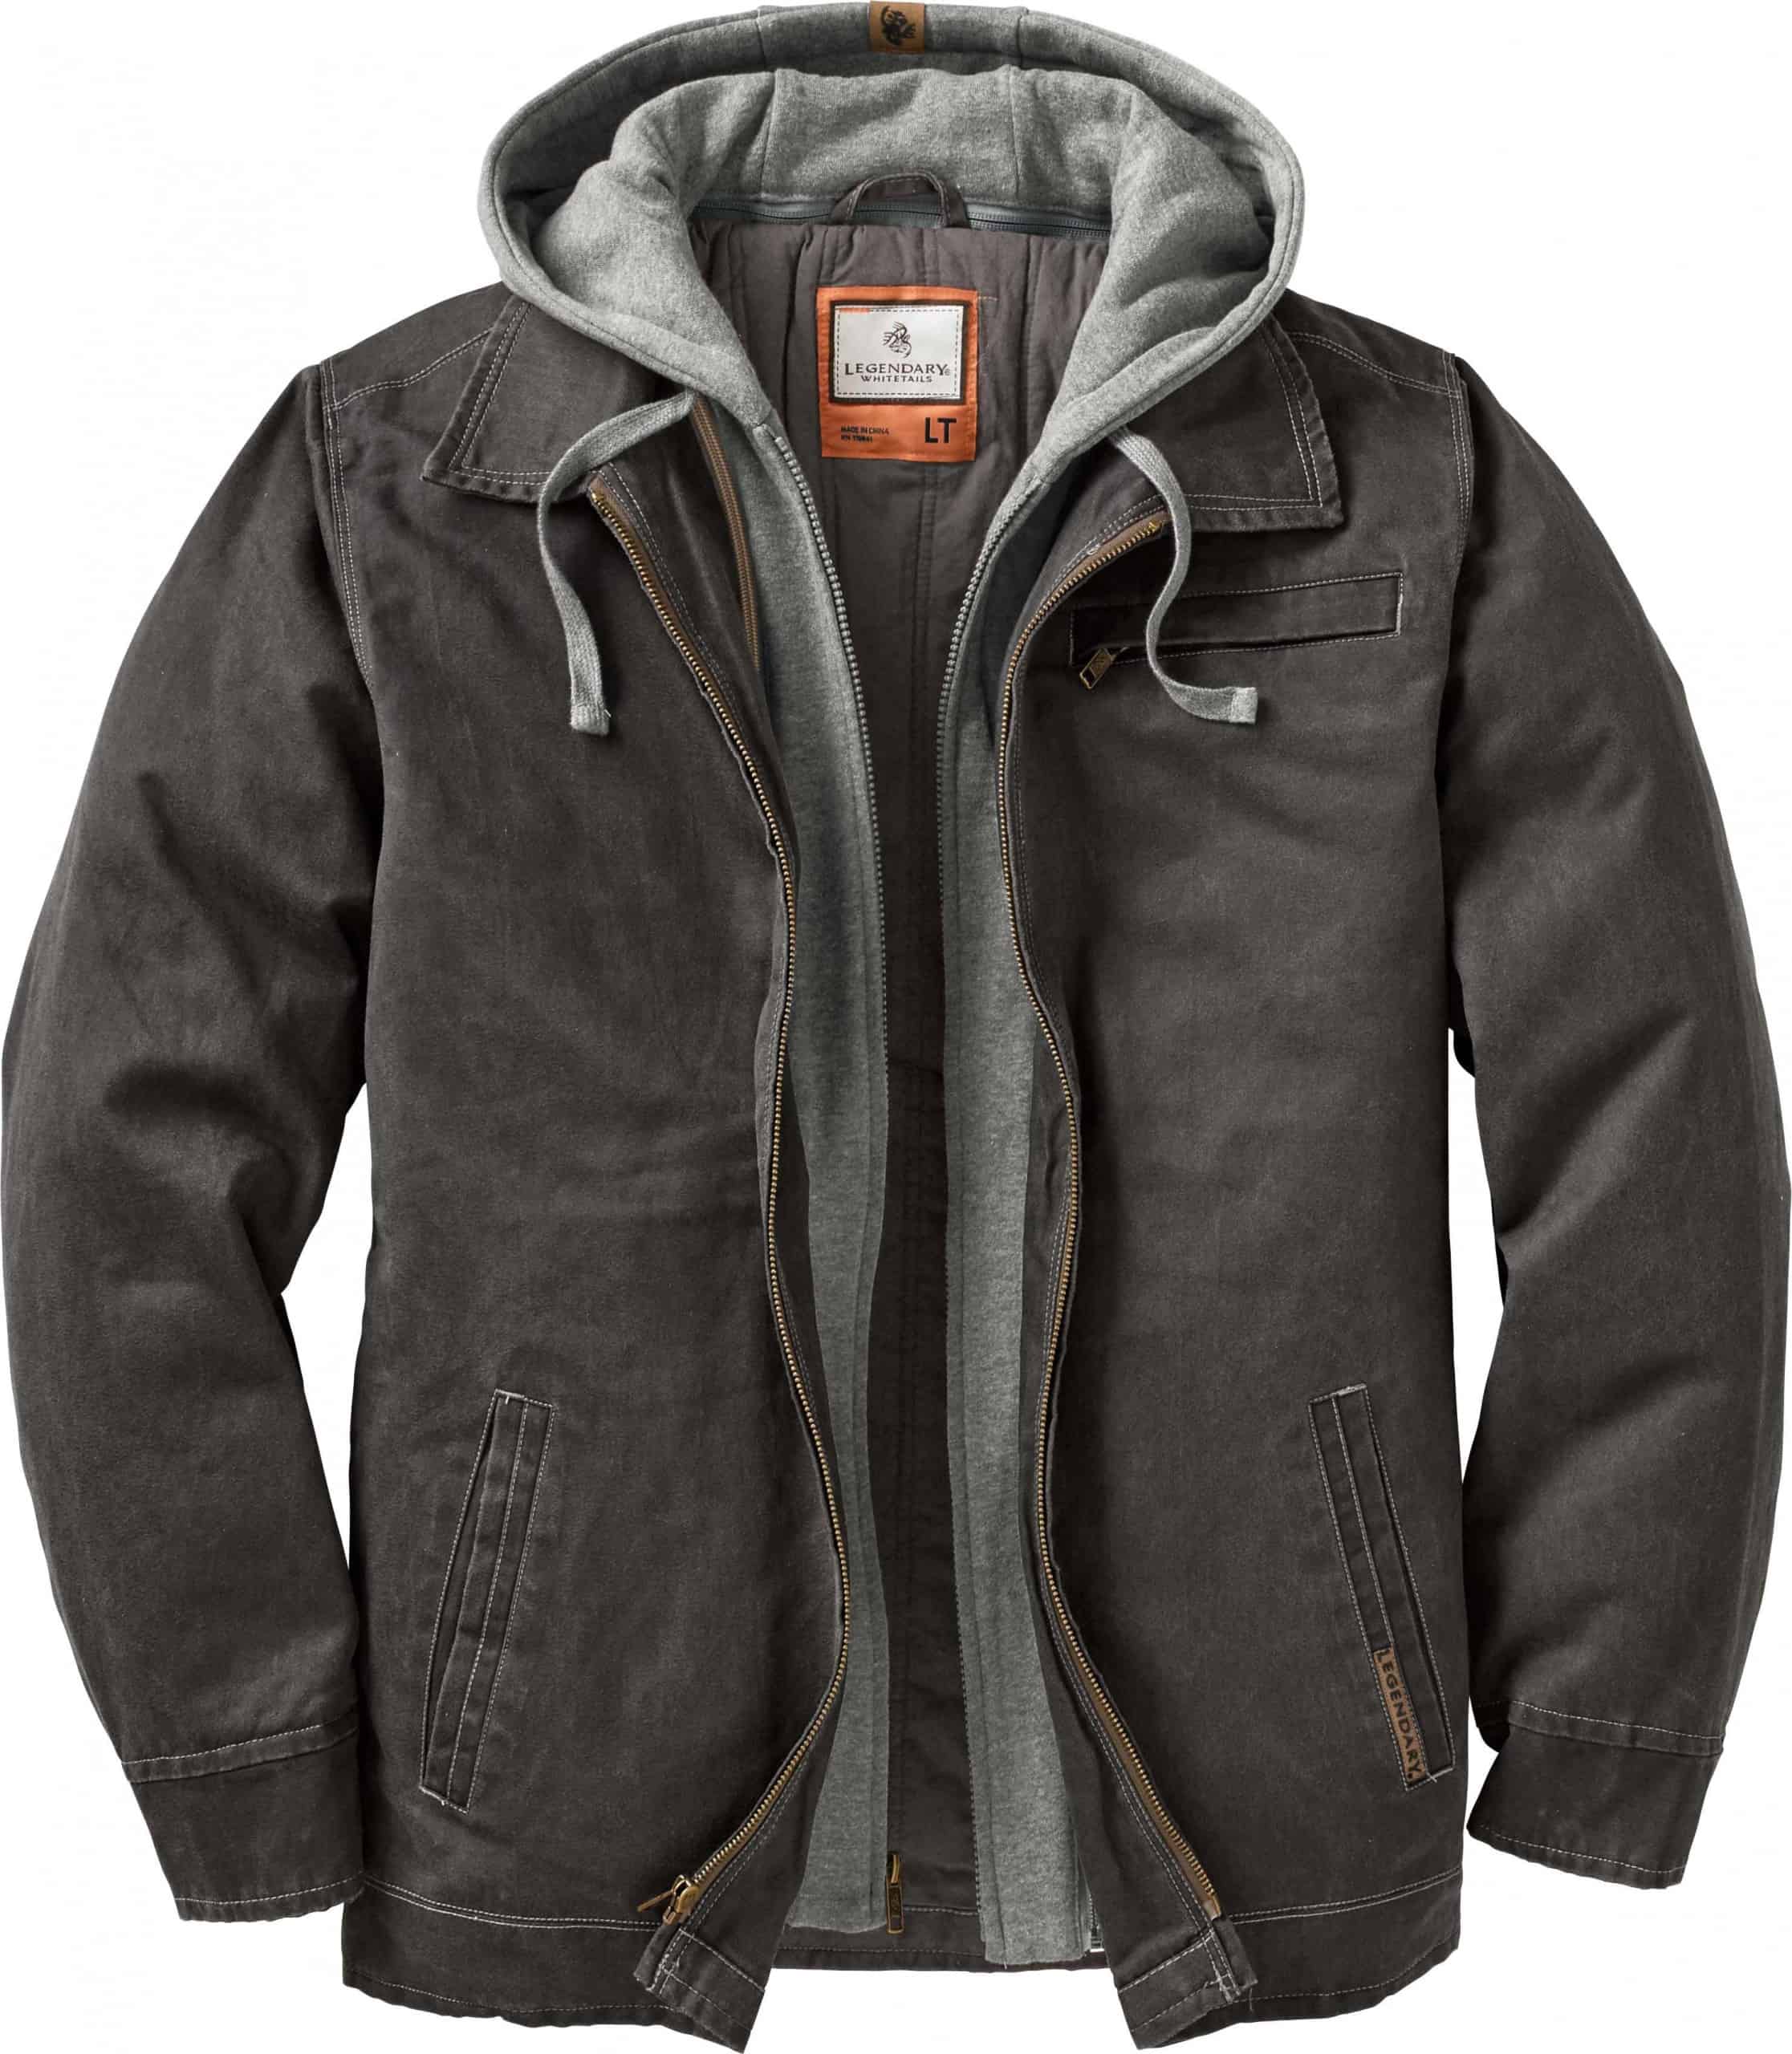 Types of mens jackets and coats